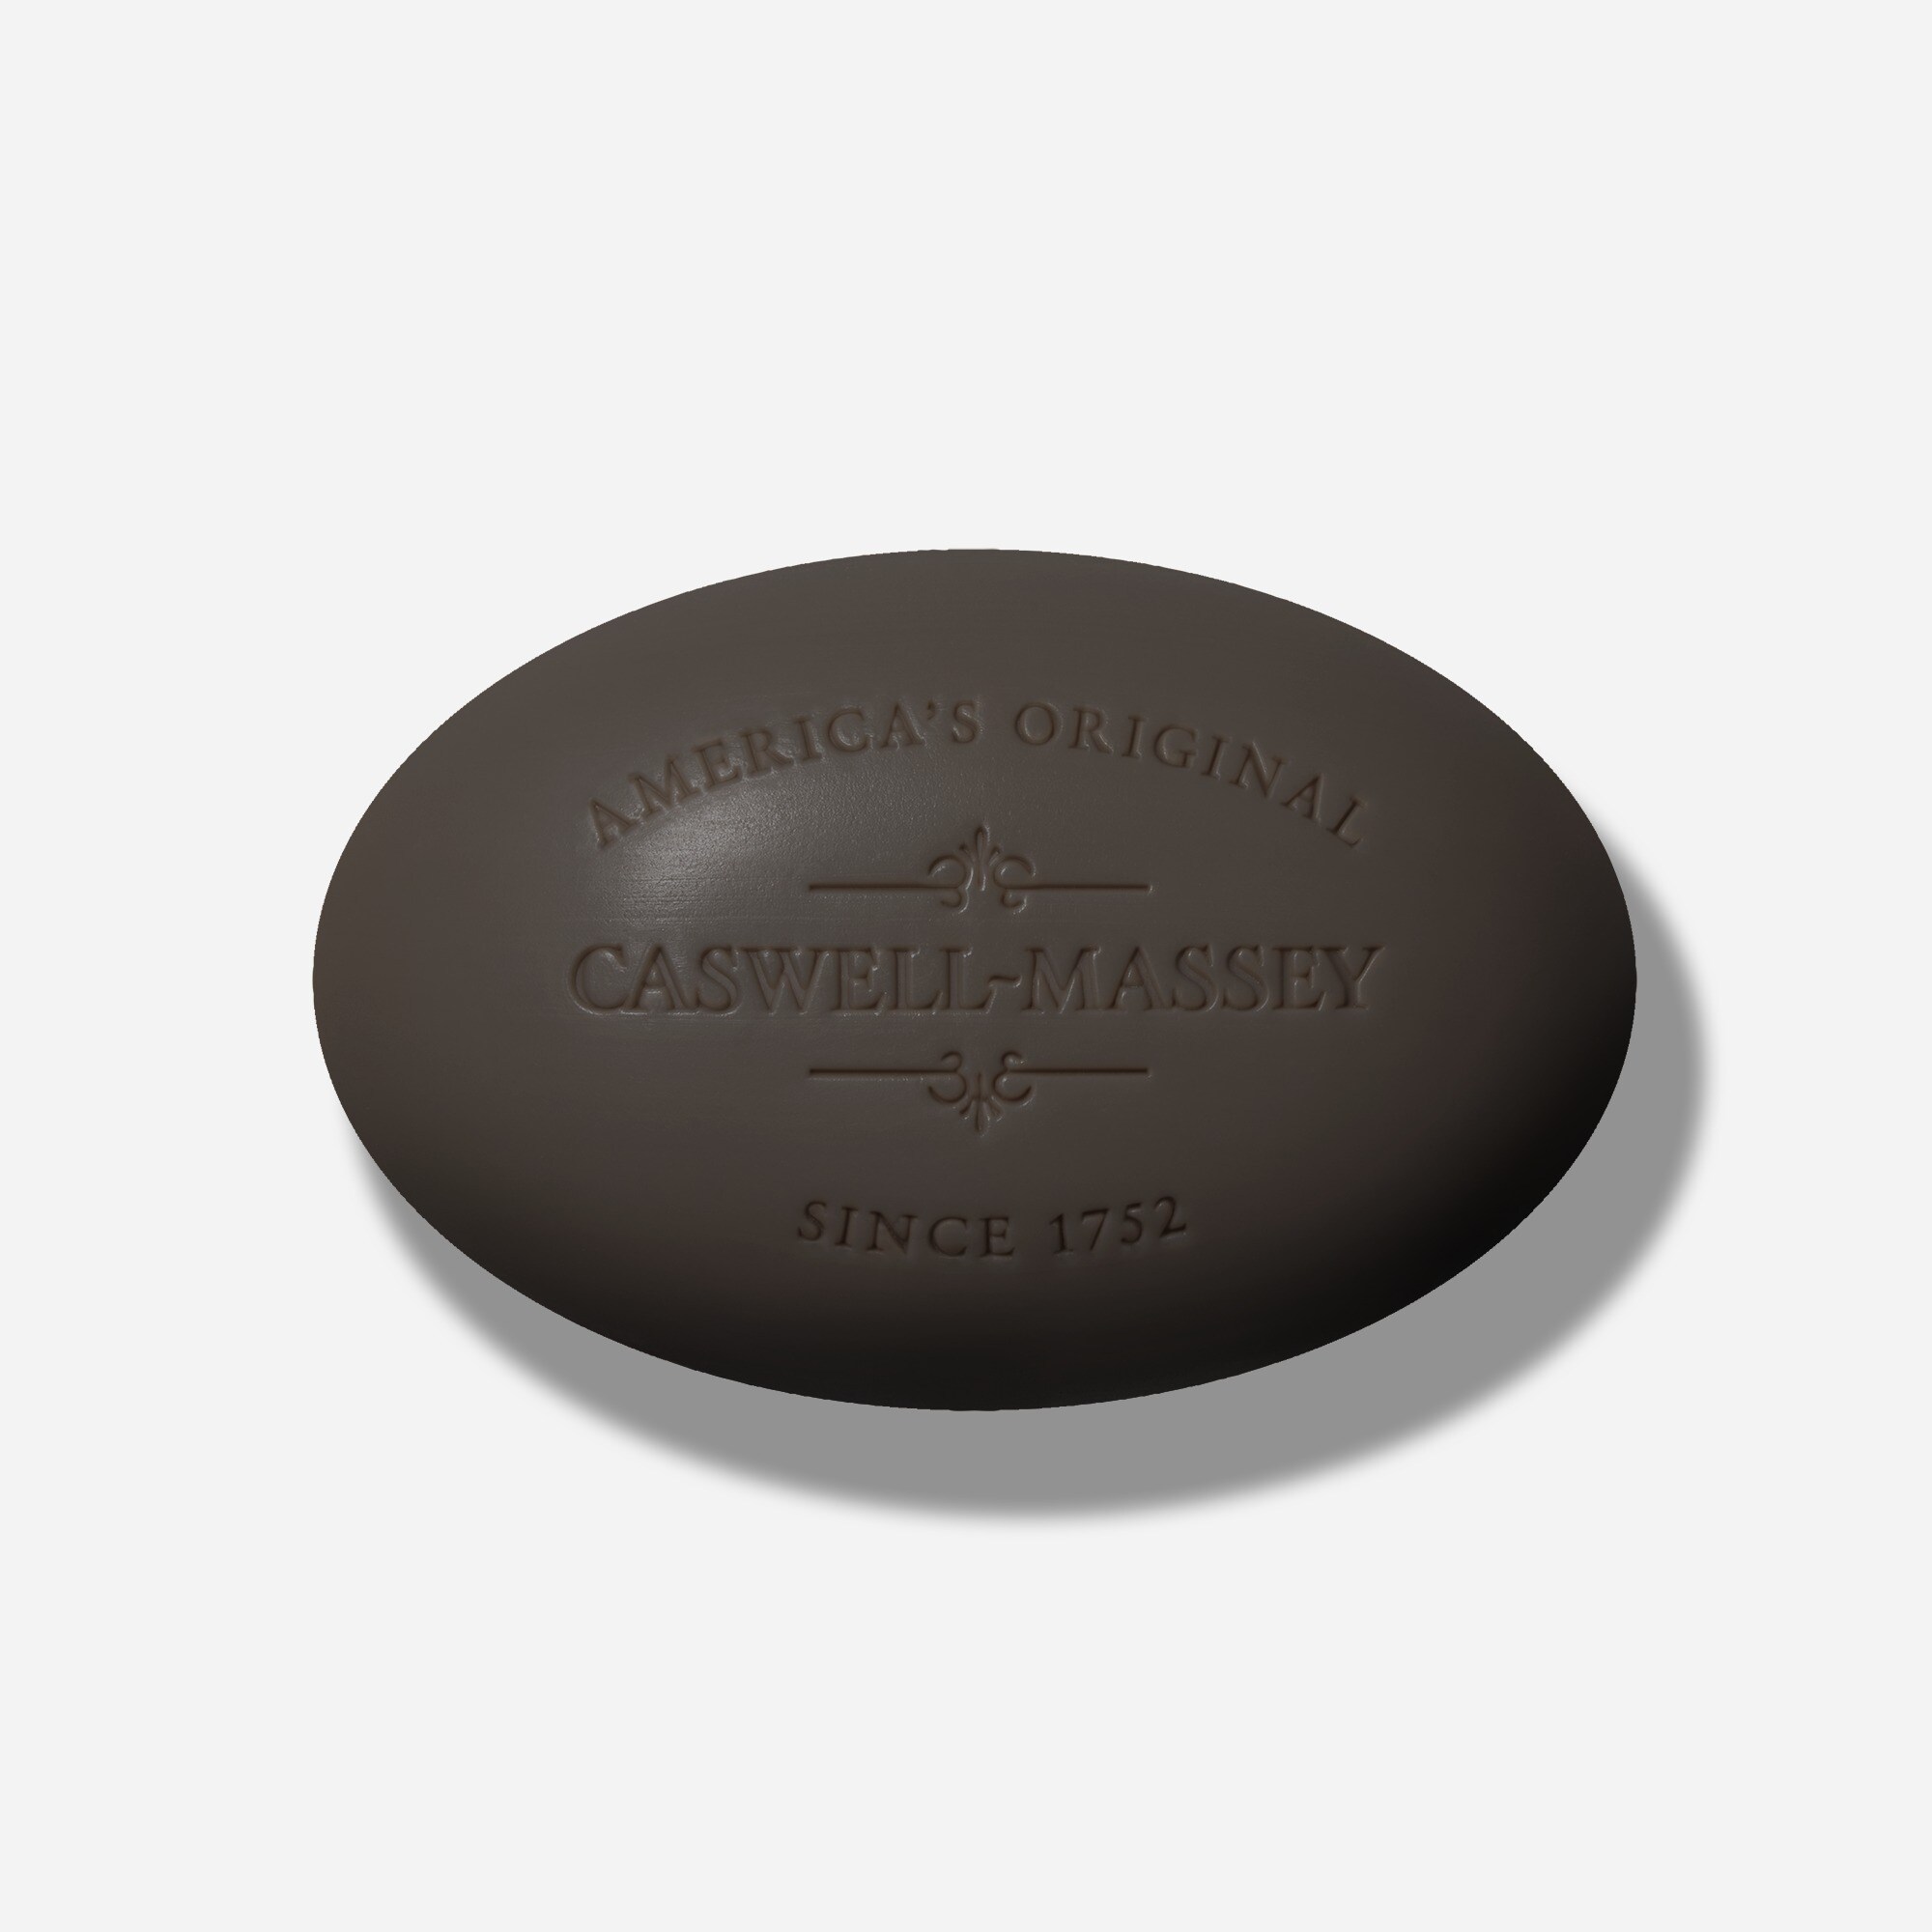  Caswell-Massey Oaire black clay bar soap